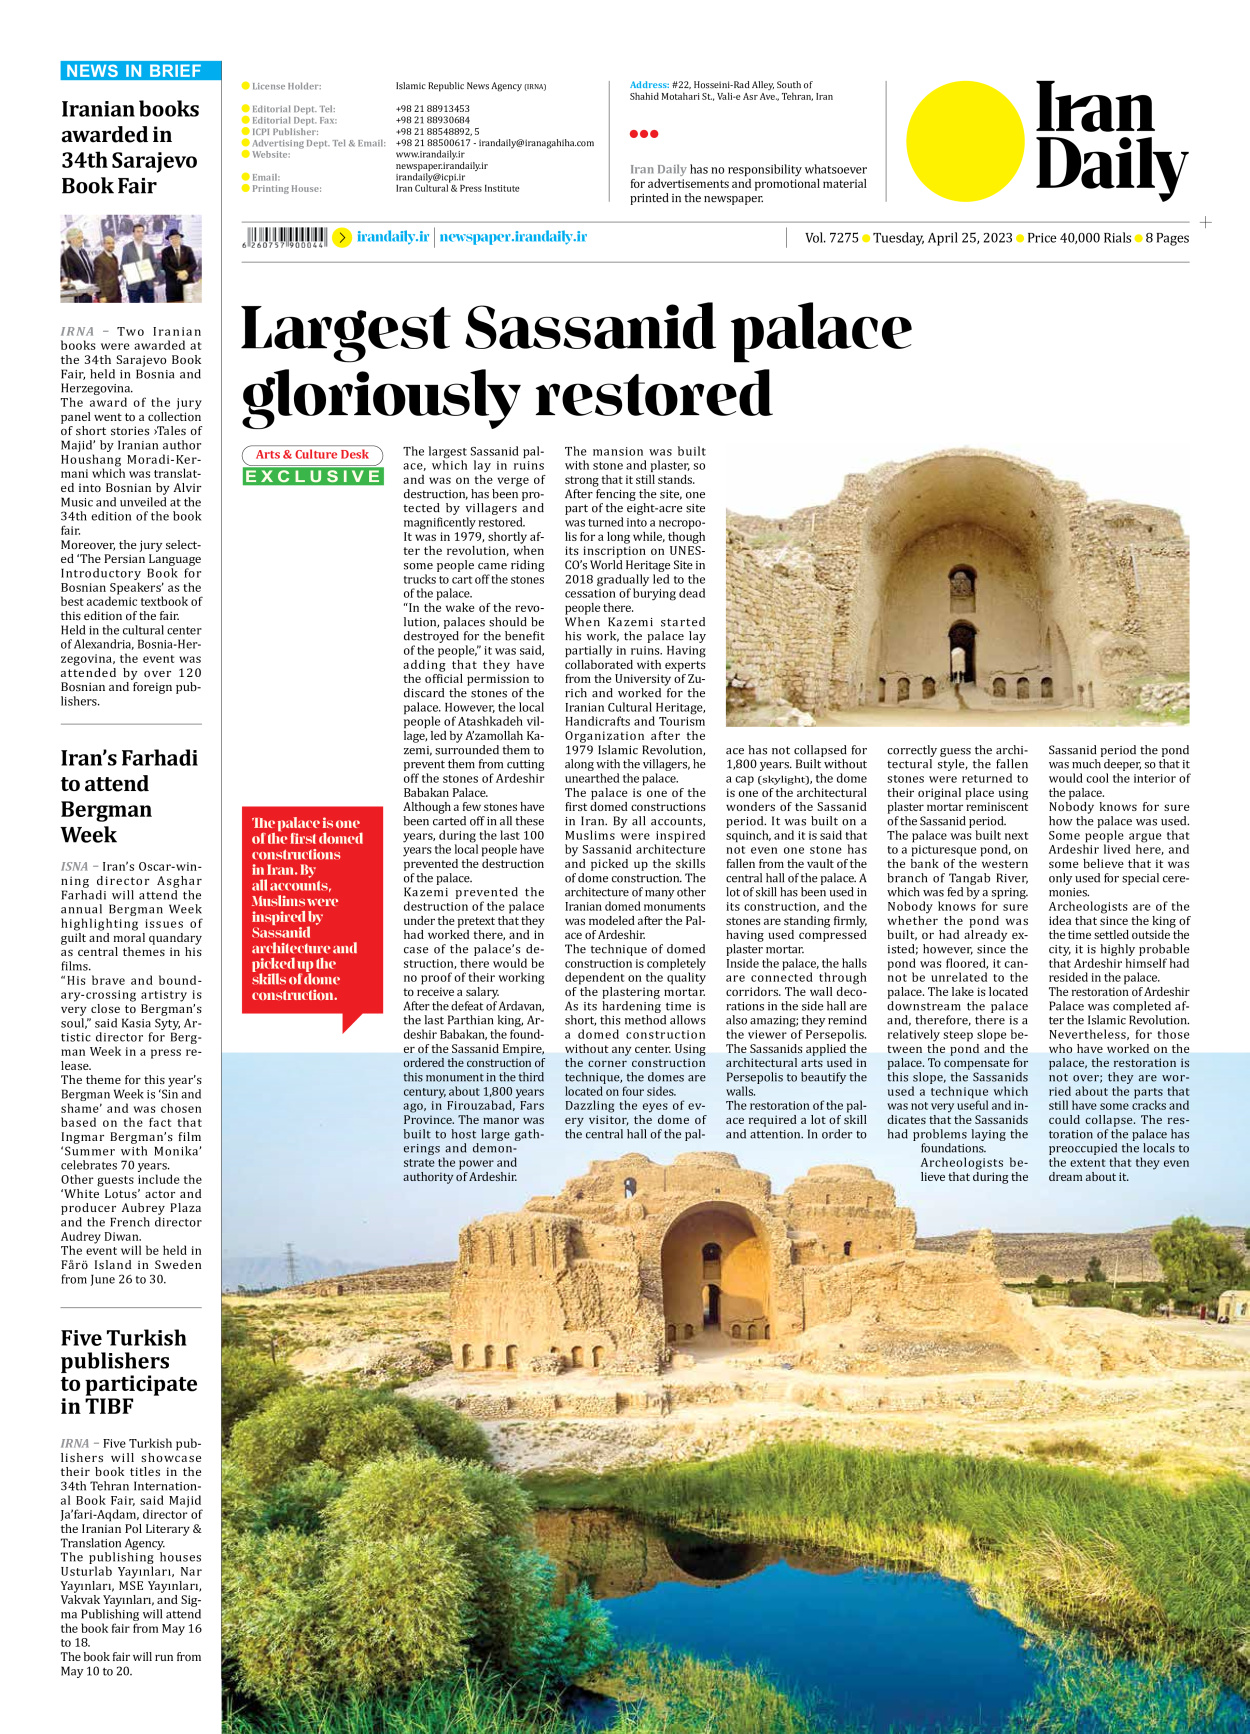 Iran Daily - Number Seven Thousand Two Hundred and Seventy Five - 25 April 2023 - Page 8